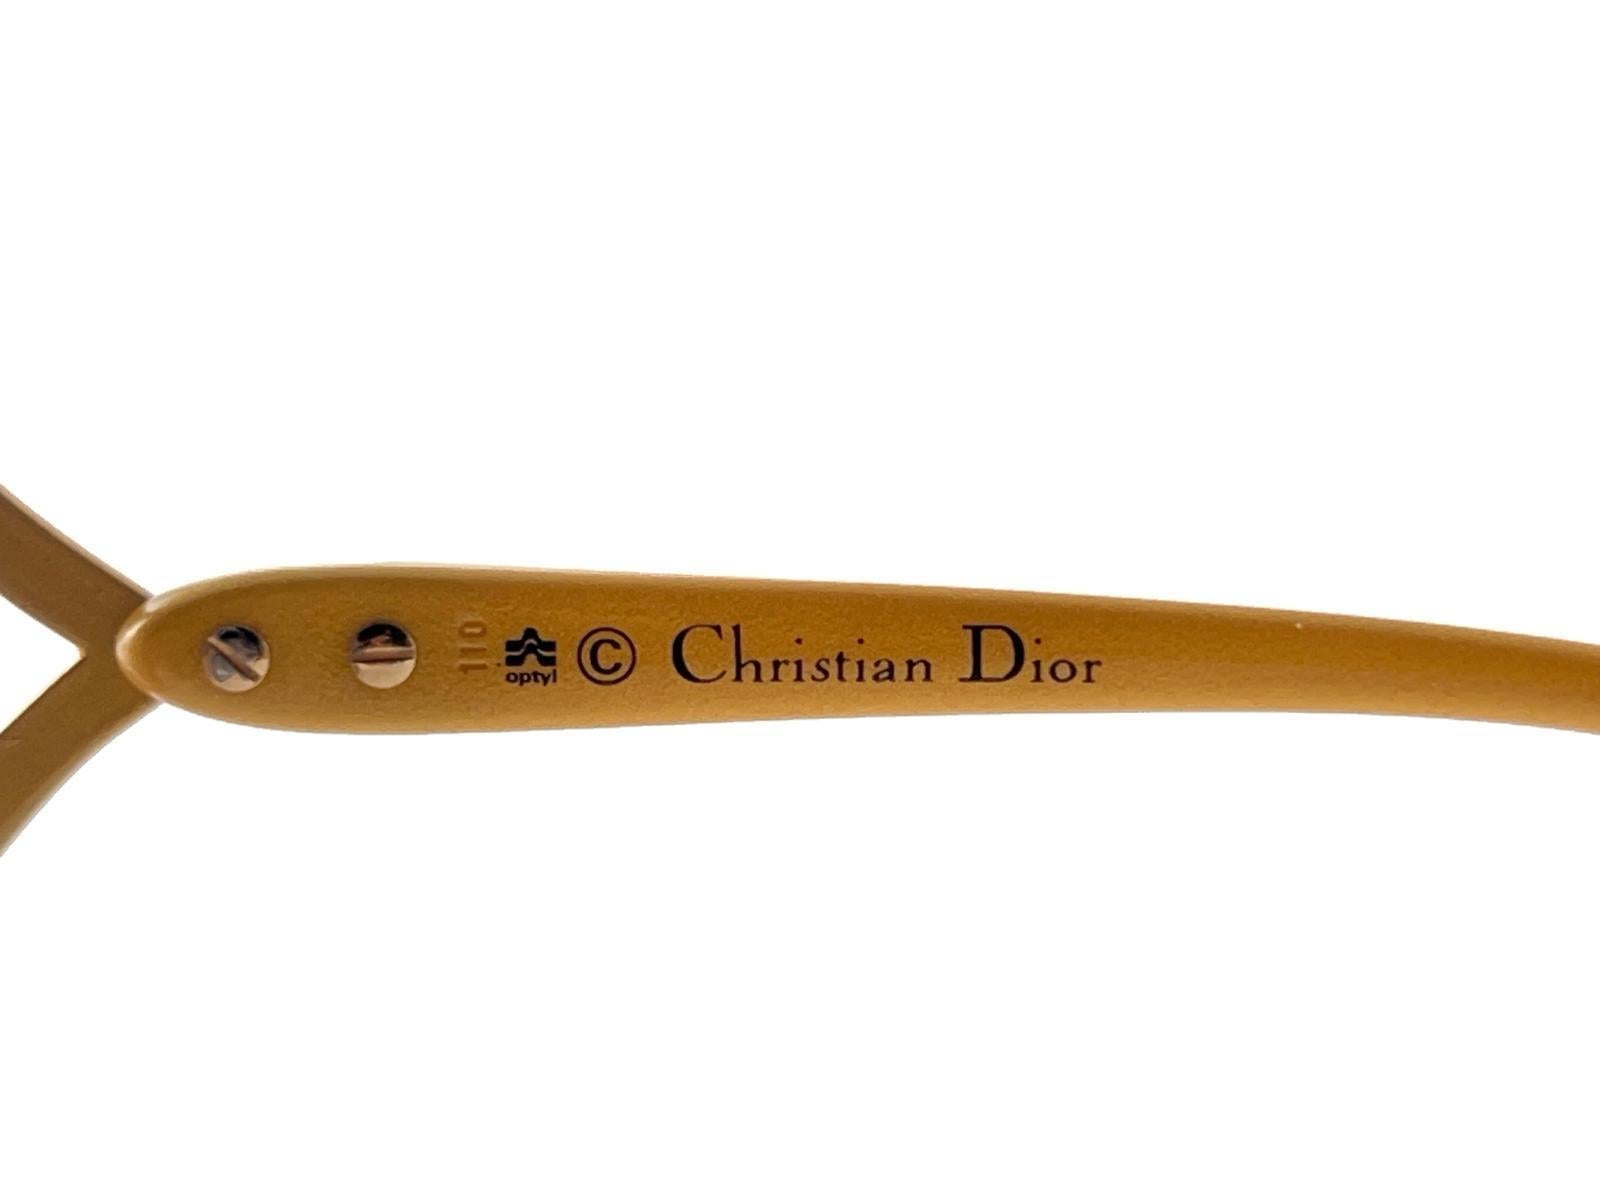 New Vintage Christian Dior 2056 40 Butterfly Mustard Sunglasses Made in Germany For Sale 5